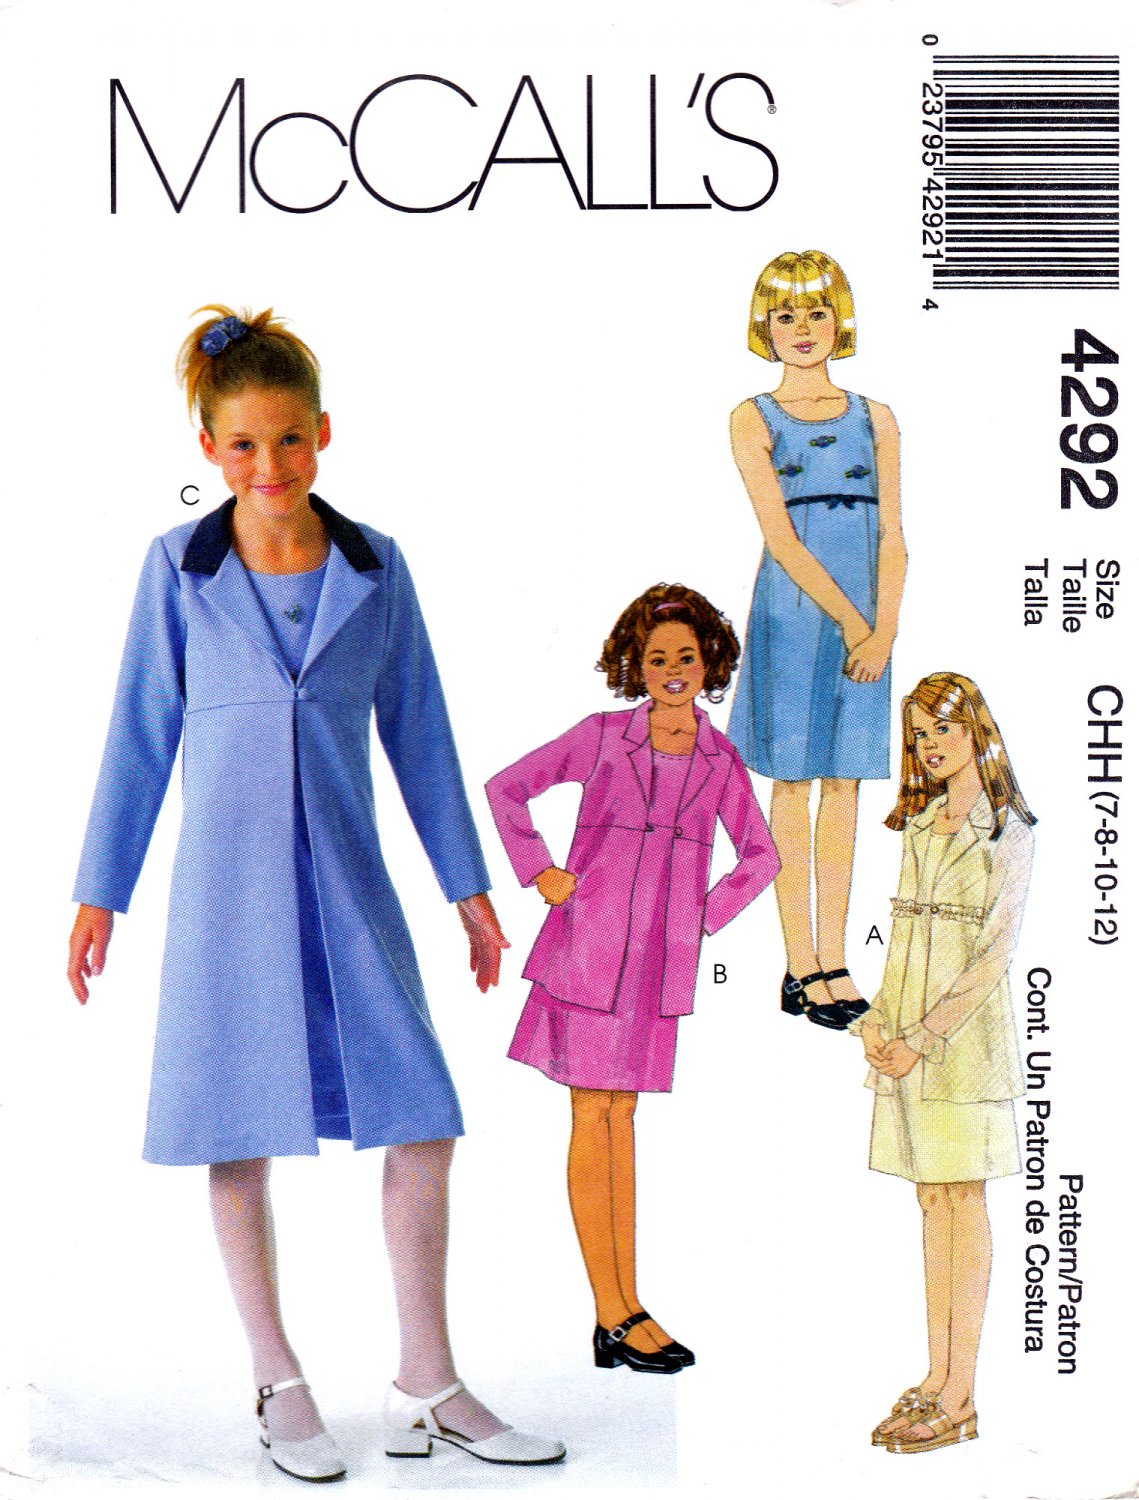 McCall's 4292 M4292 Girls Sewing Pattern Childrens Dress and Unlined Jacket Sizes 7-8-10-12